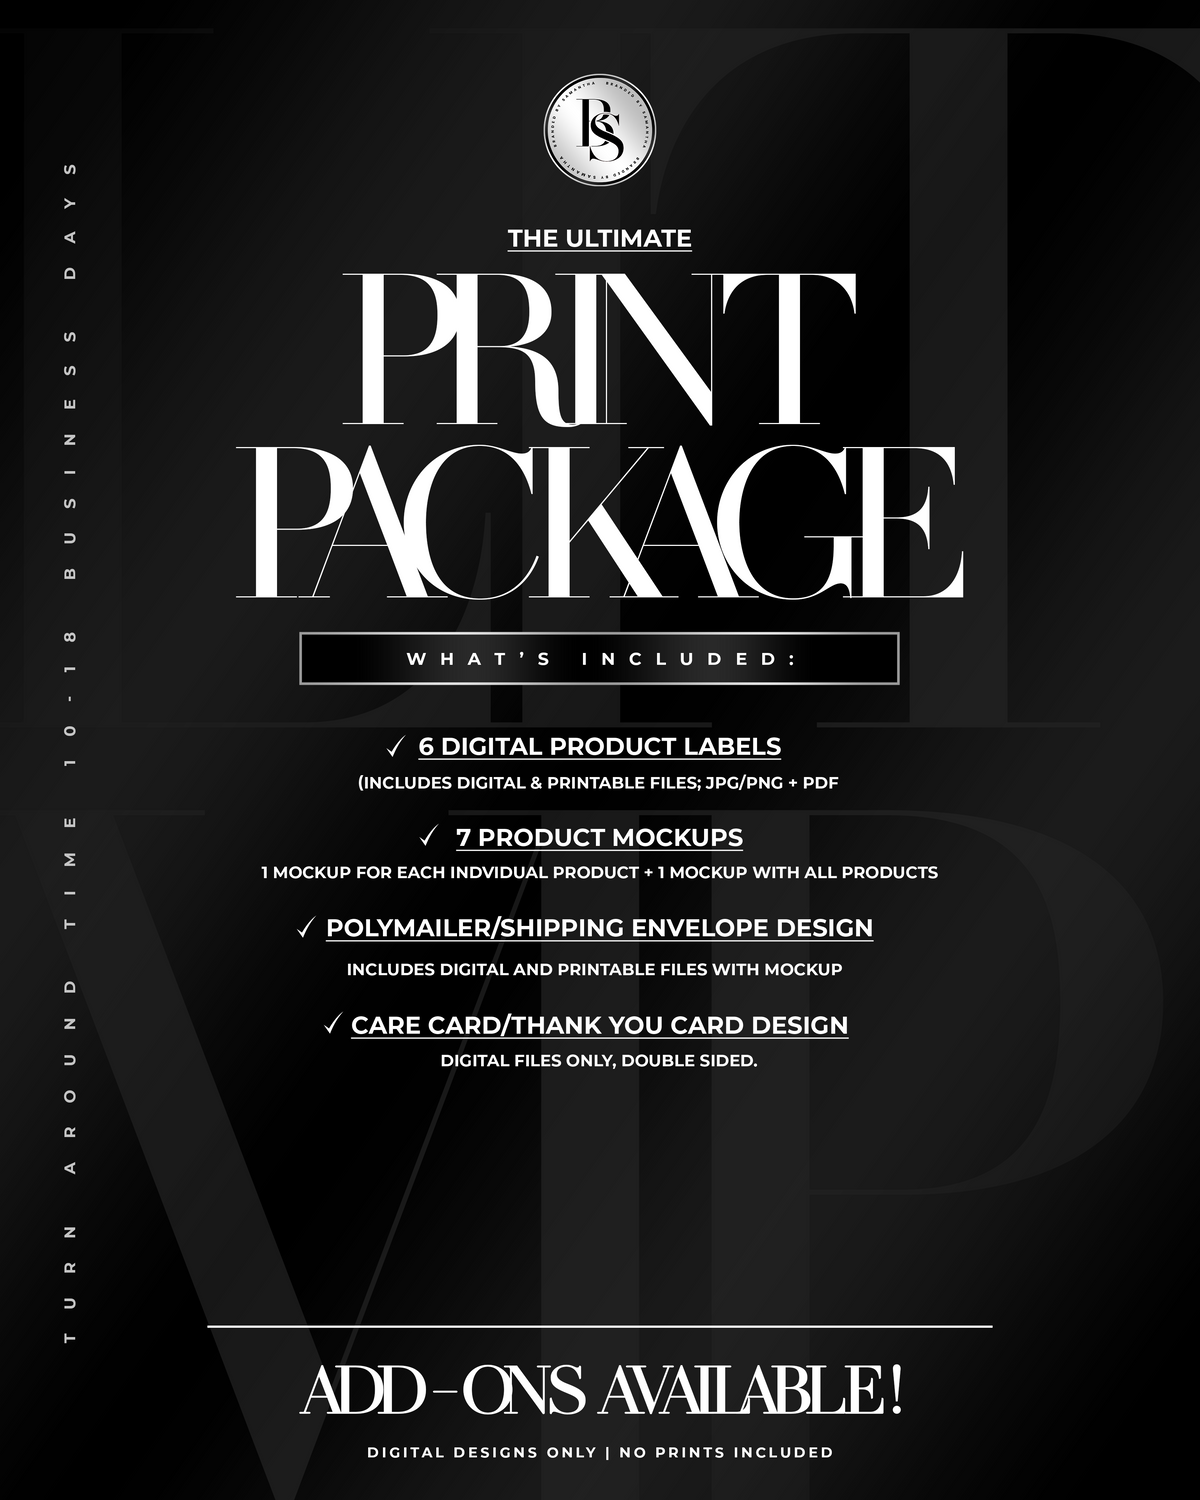 The Print Package